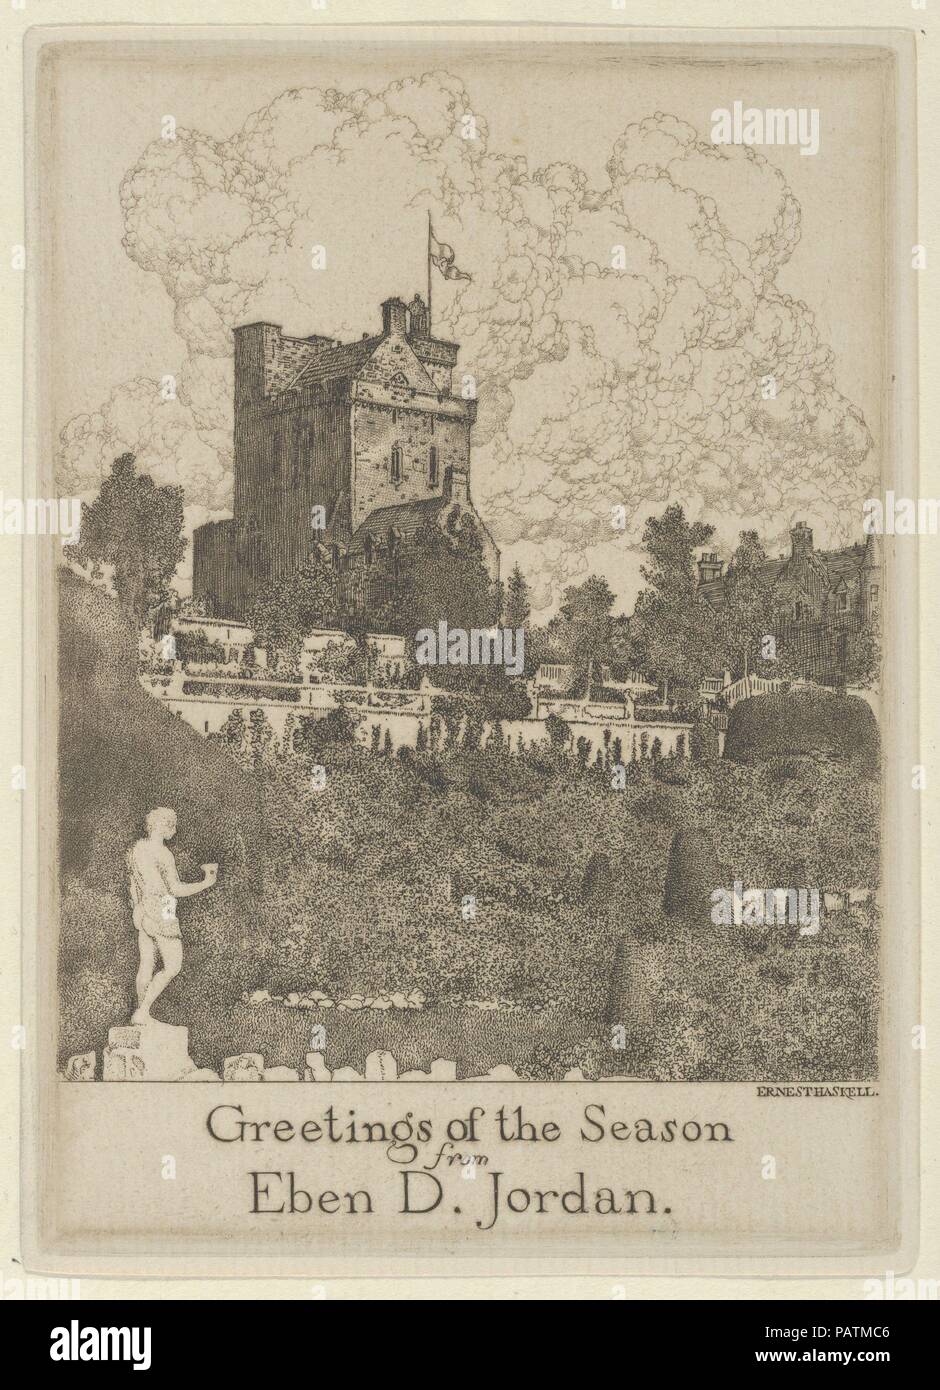 Greetings of the Season from Eben D. Jordan. Artist: Ernest Haskell (American, Woodstock, Connecticut 1876-1925 West Point, Maine). Dimensions: Sheet (Trimmed): 5 1/4 × 3 3/4 in. (13.3 × 9.6 cm). Date: 1916-25.  View of Drummond Castle of the Duke of Argyle. Museum: Metropolitan Museum of Art, New York, USA. Stock Photo